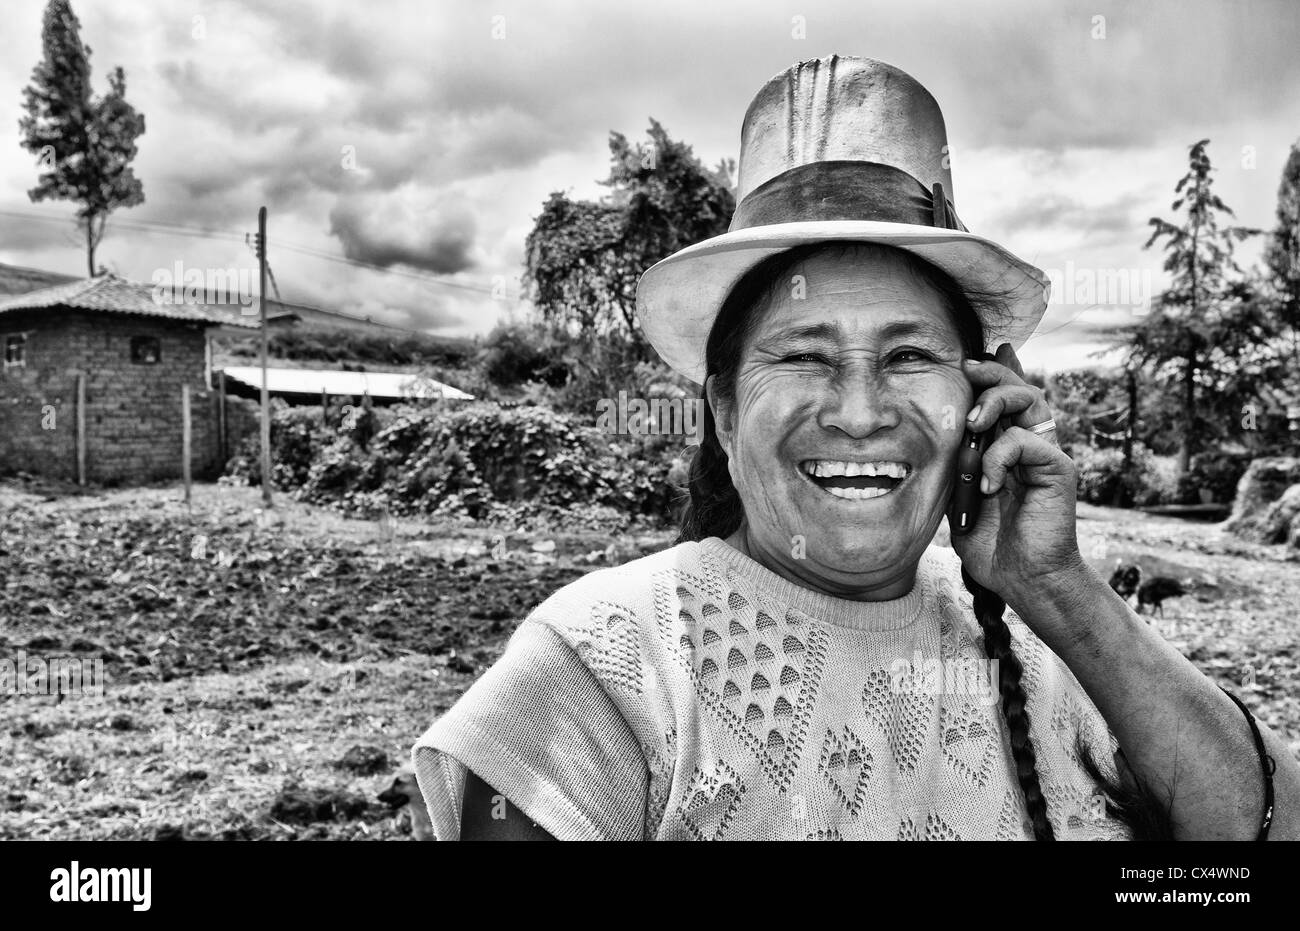 Wonderful farming woman on farm with cell phone in traditional dress and smiling happy workers in Chinchero Peru Stock Photo